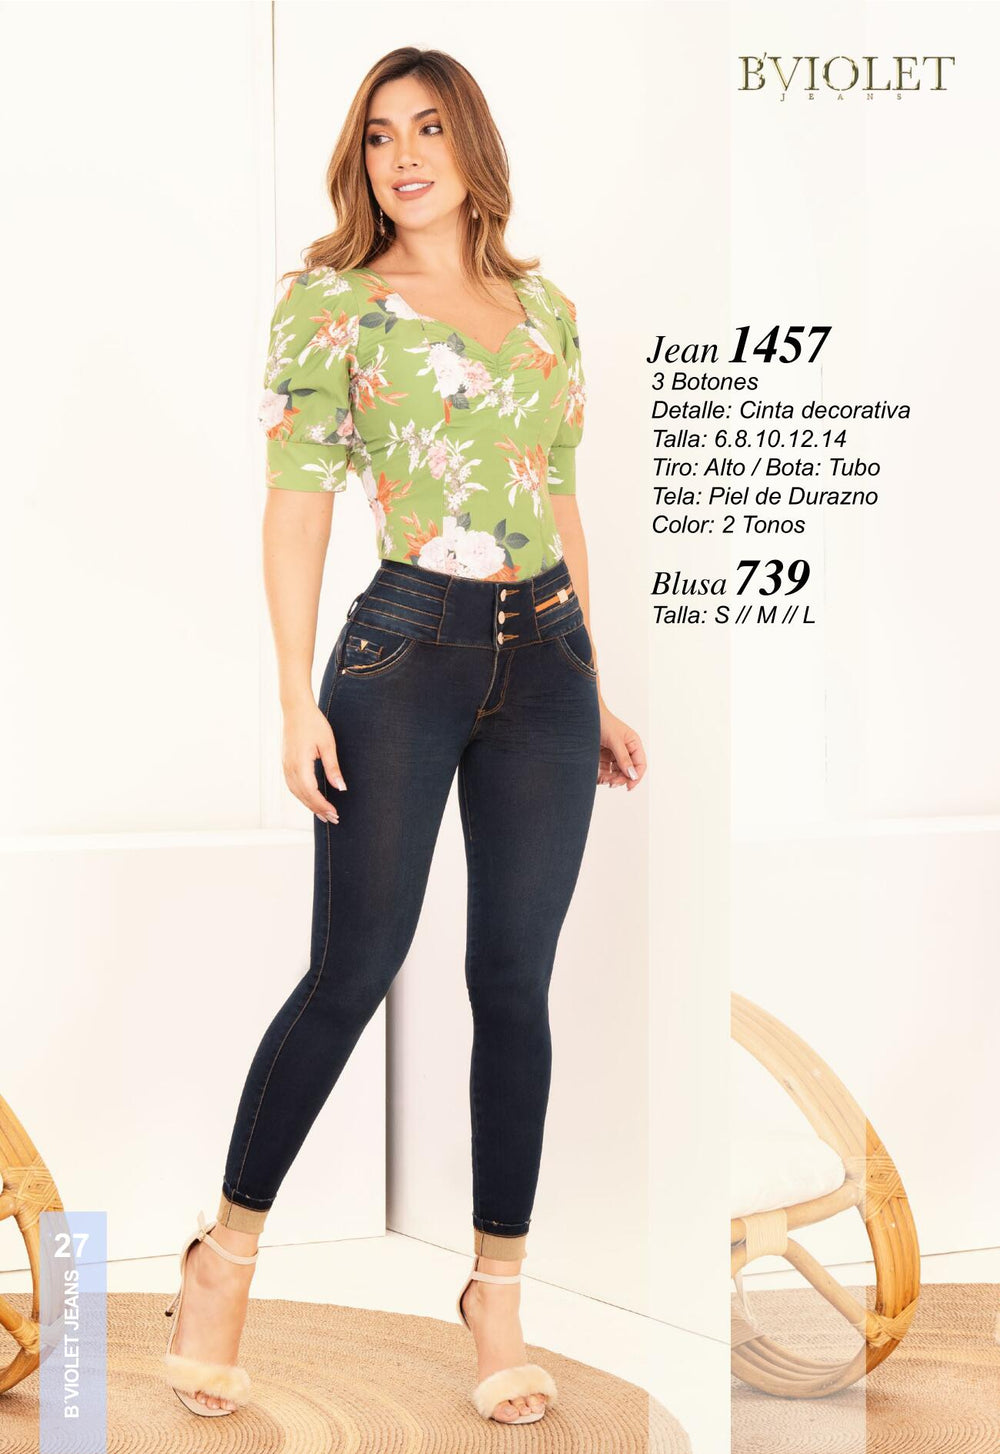 NYE Jeans Y063859 100% Colombian Jeans – Jeanscol Boutique